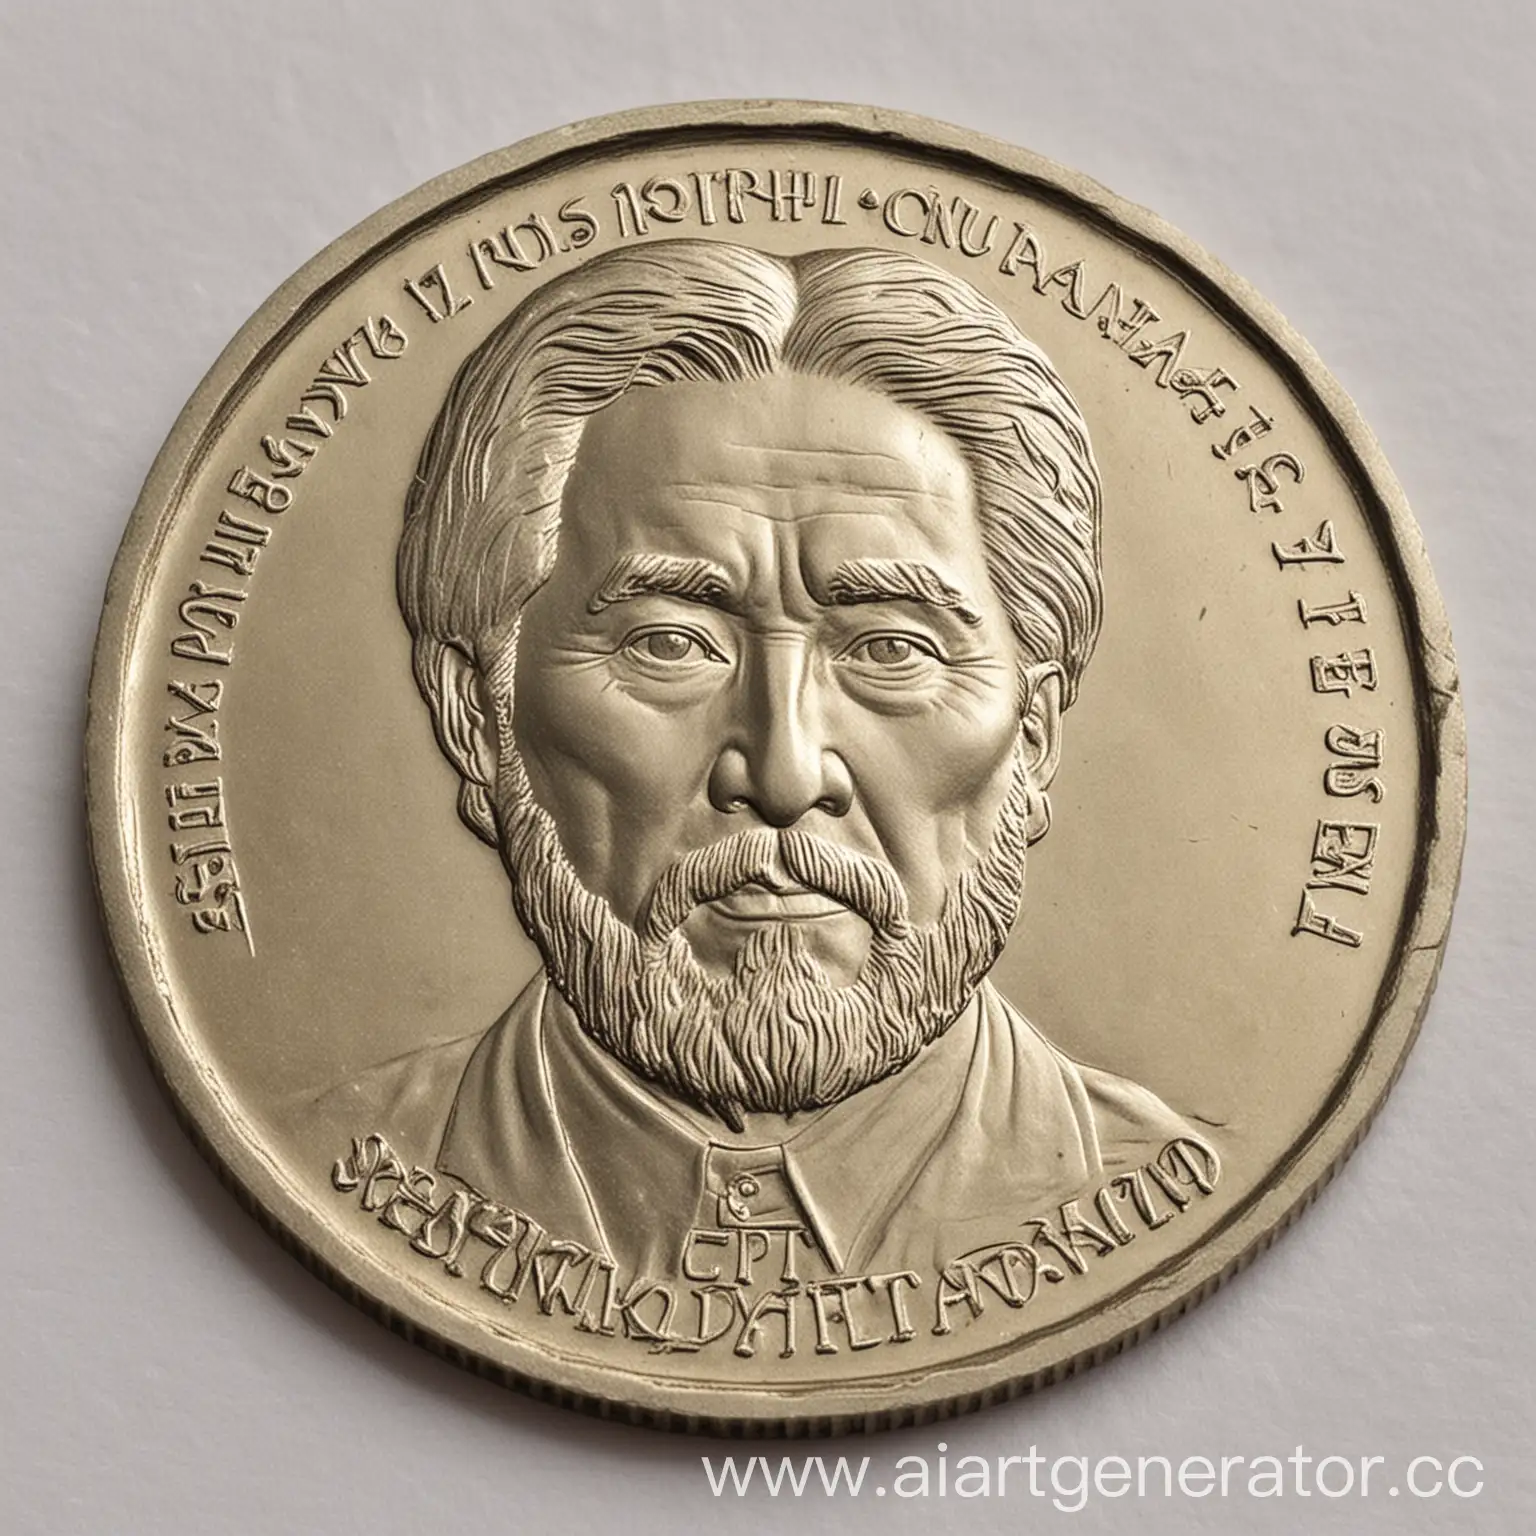 Collectible-Coin-Featuring-Chingiz-Aitmatov-Renowned-Kyrgyz-Writer